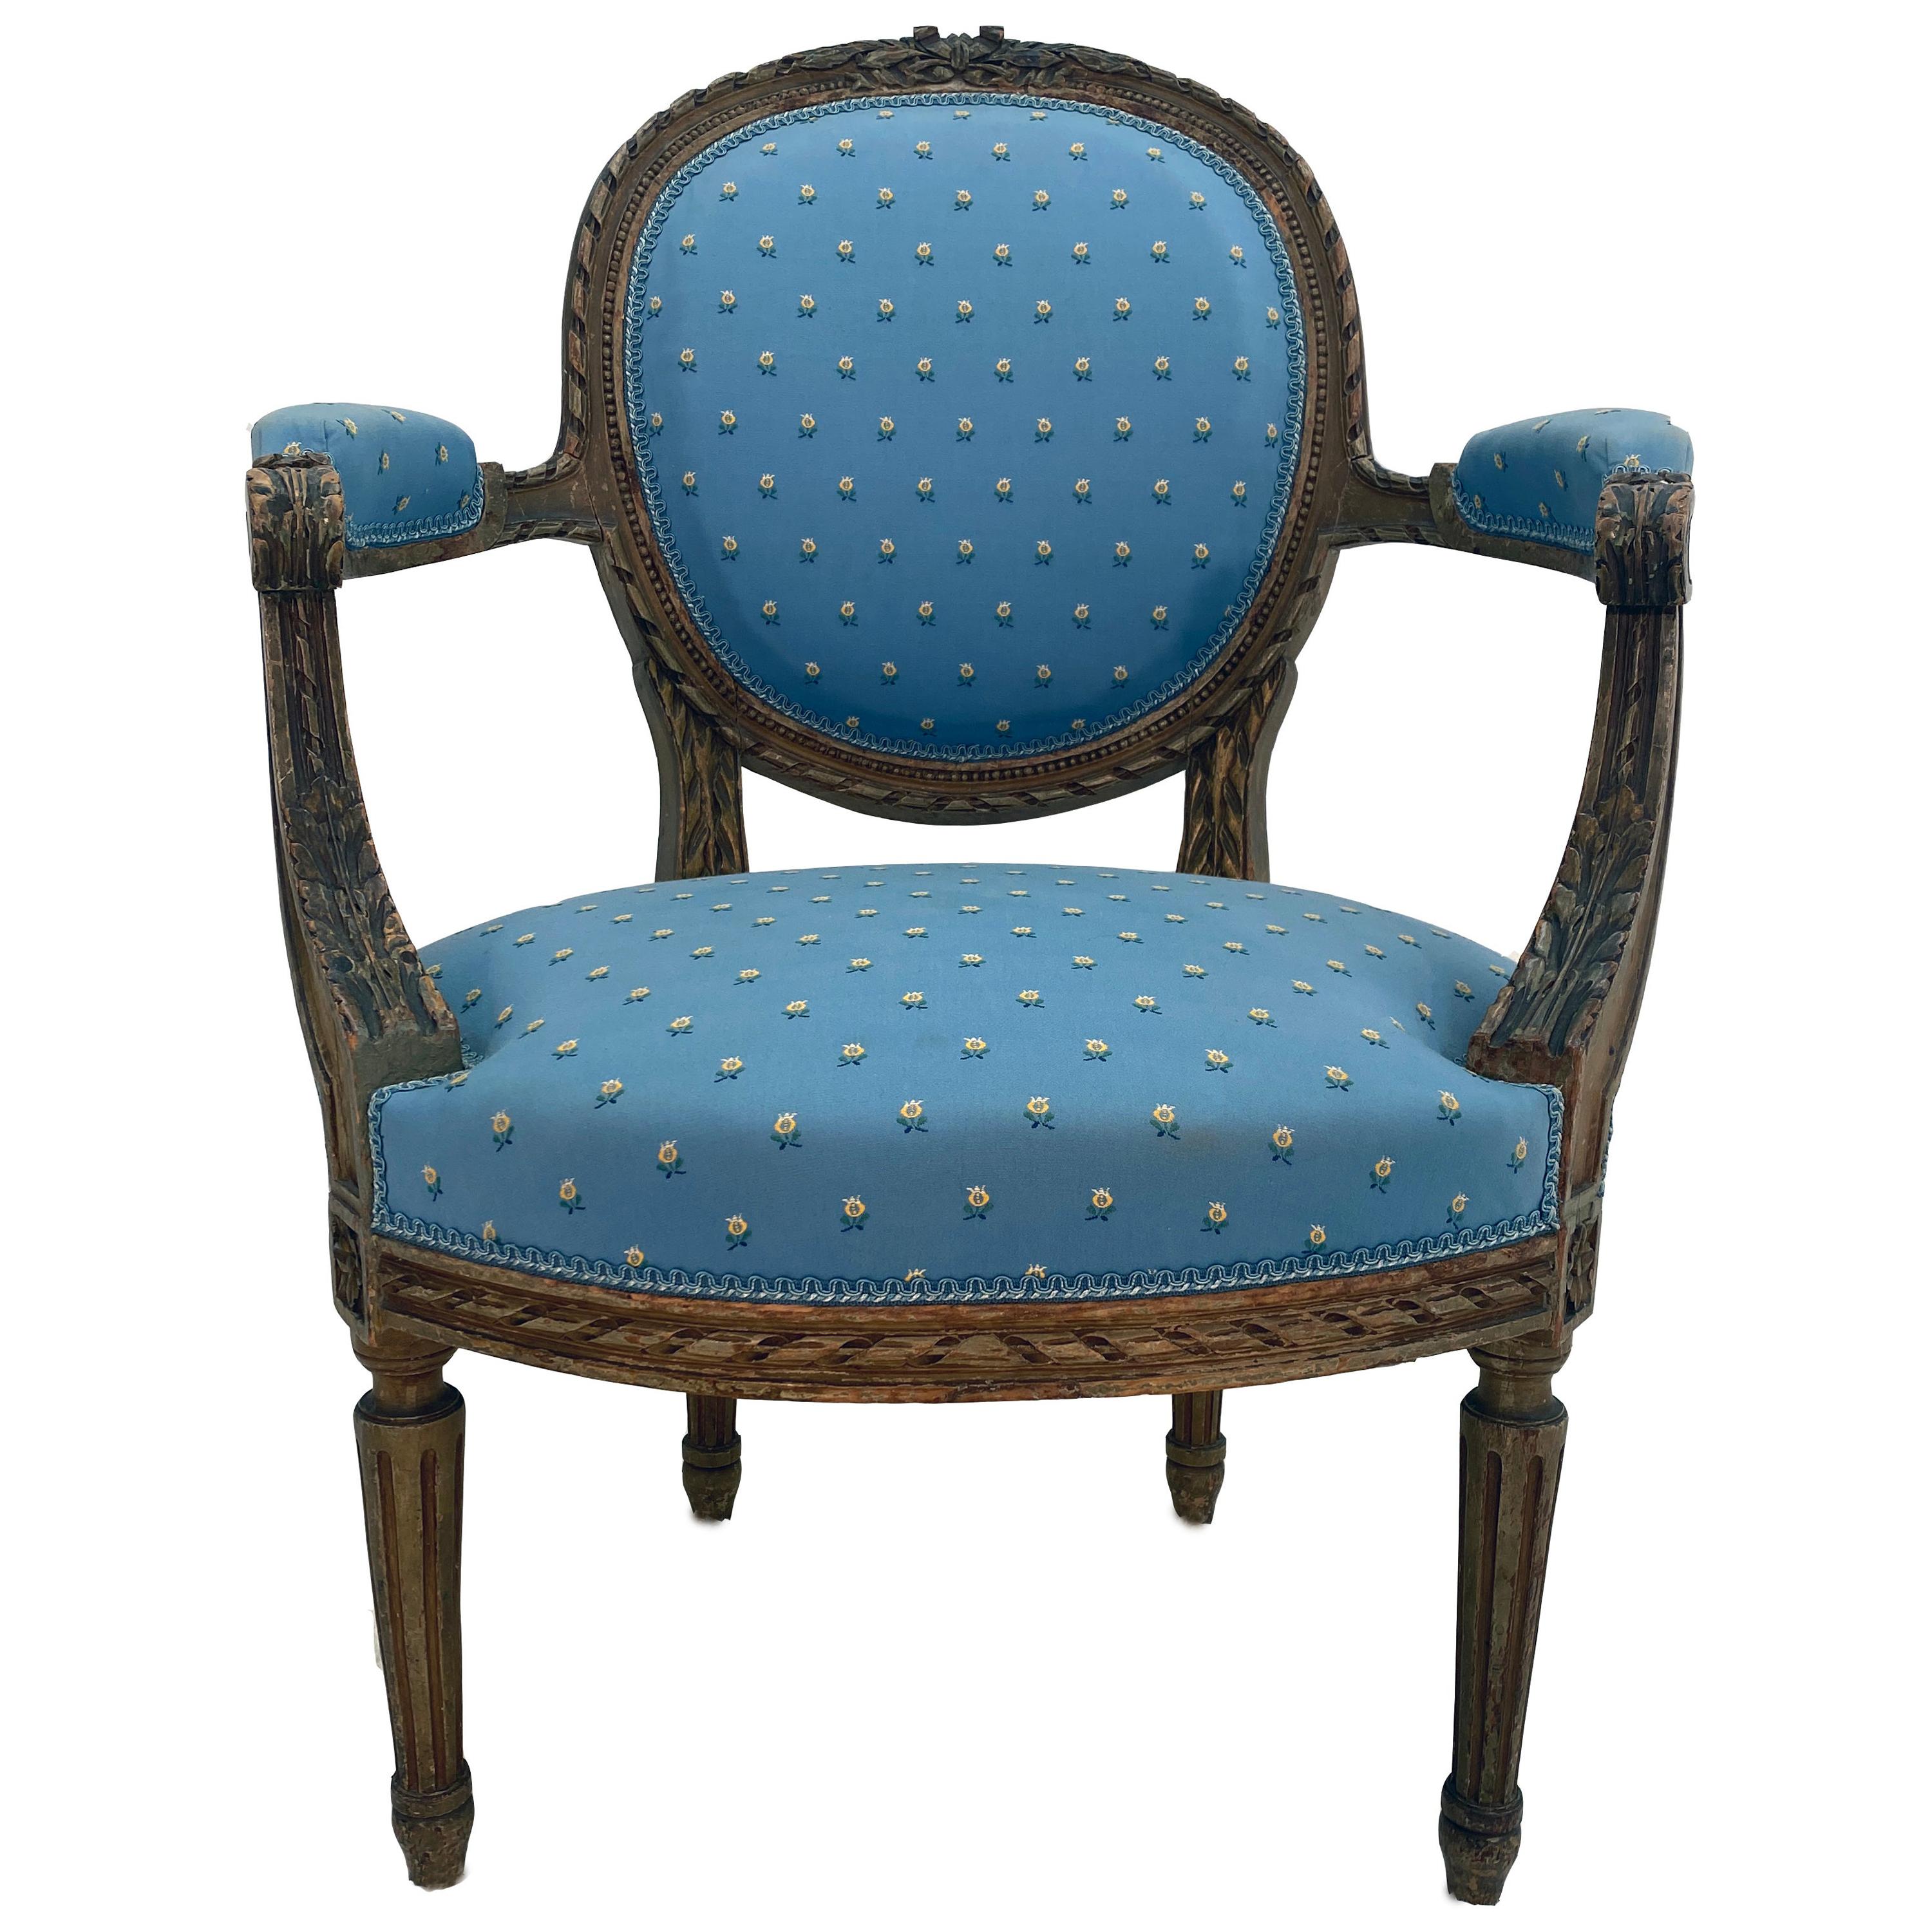 Painted 19th Century French Louis XVI Style Fauteuil Arm Chair